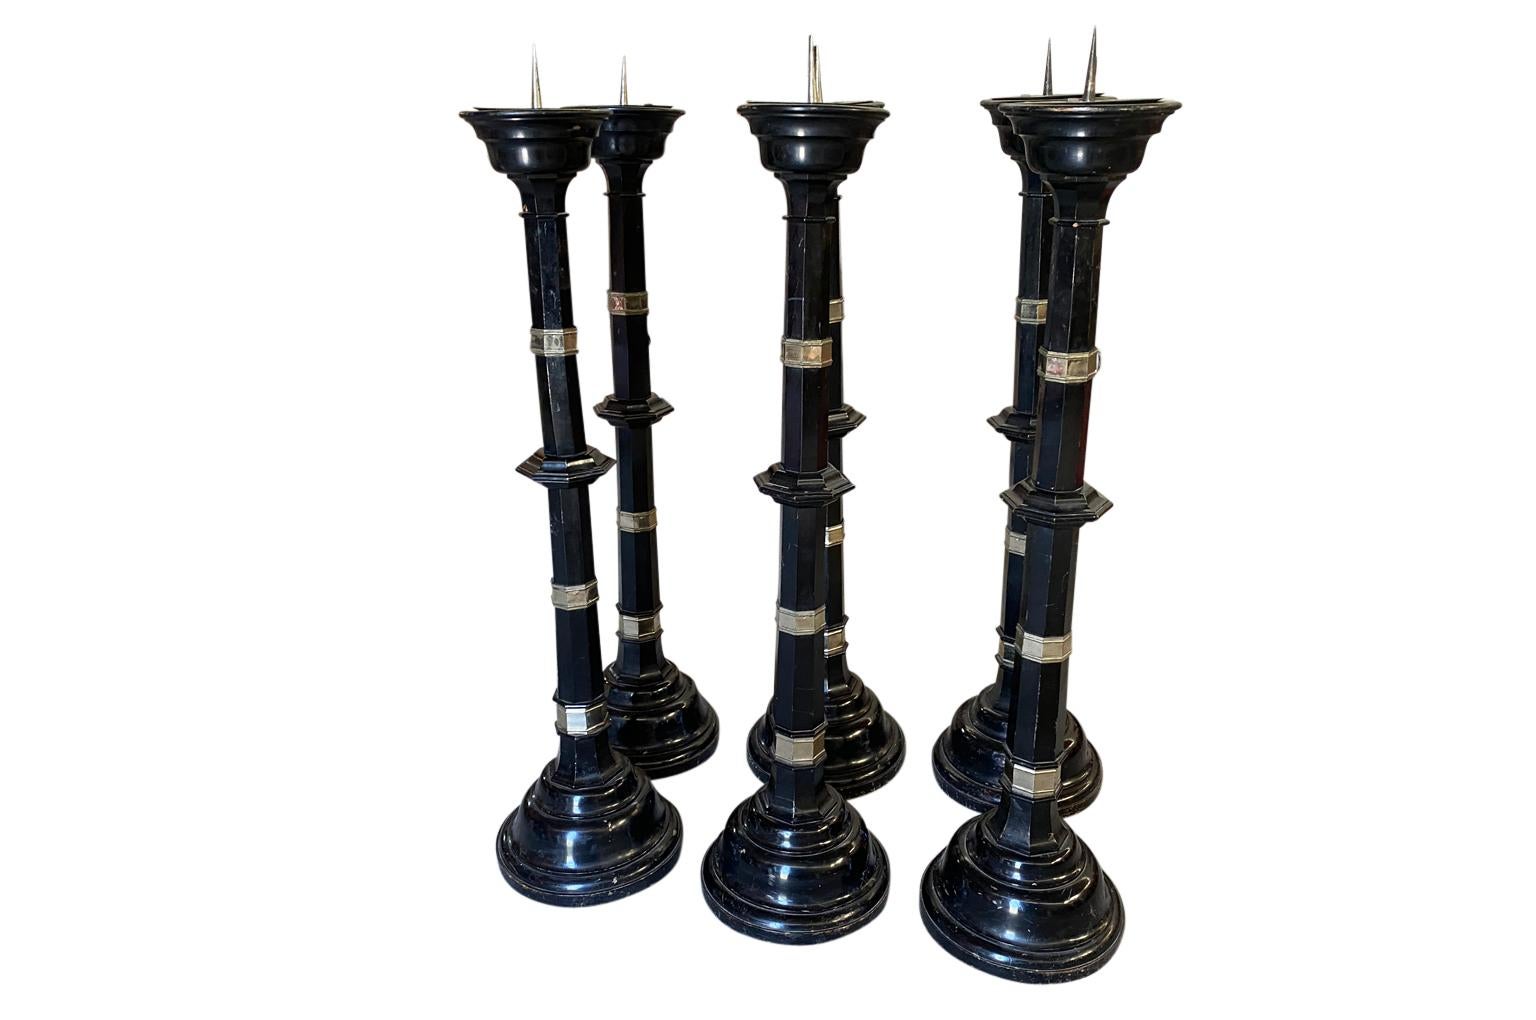 A stunning set of 6 Pique Cireges from London, England. Beautifully constructed from lacquered wood with metal accents. Super chic. The Pique Cierges may be purchased in the set of 6 or in pairs. The price for the pair is $7500.